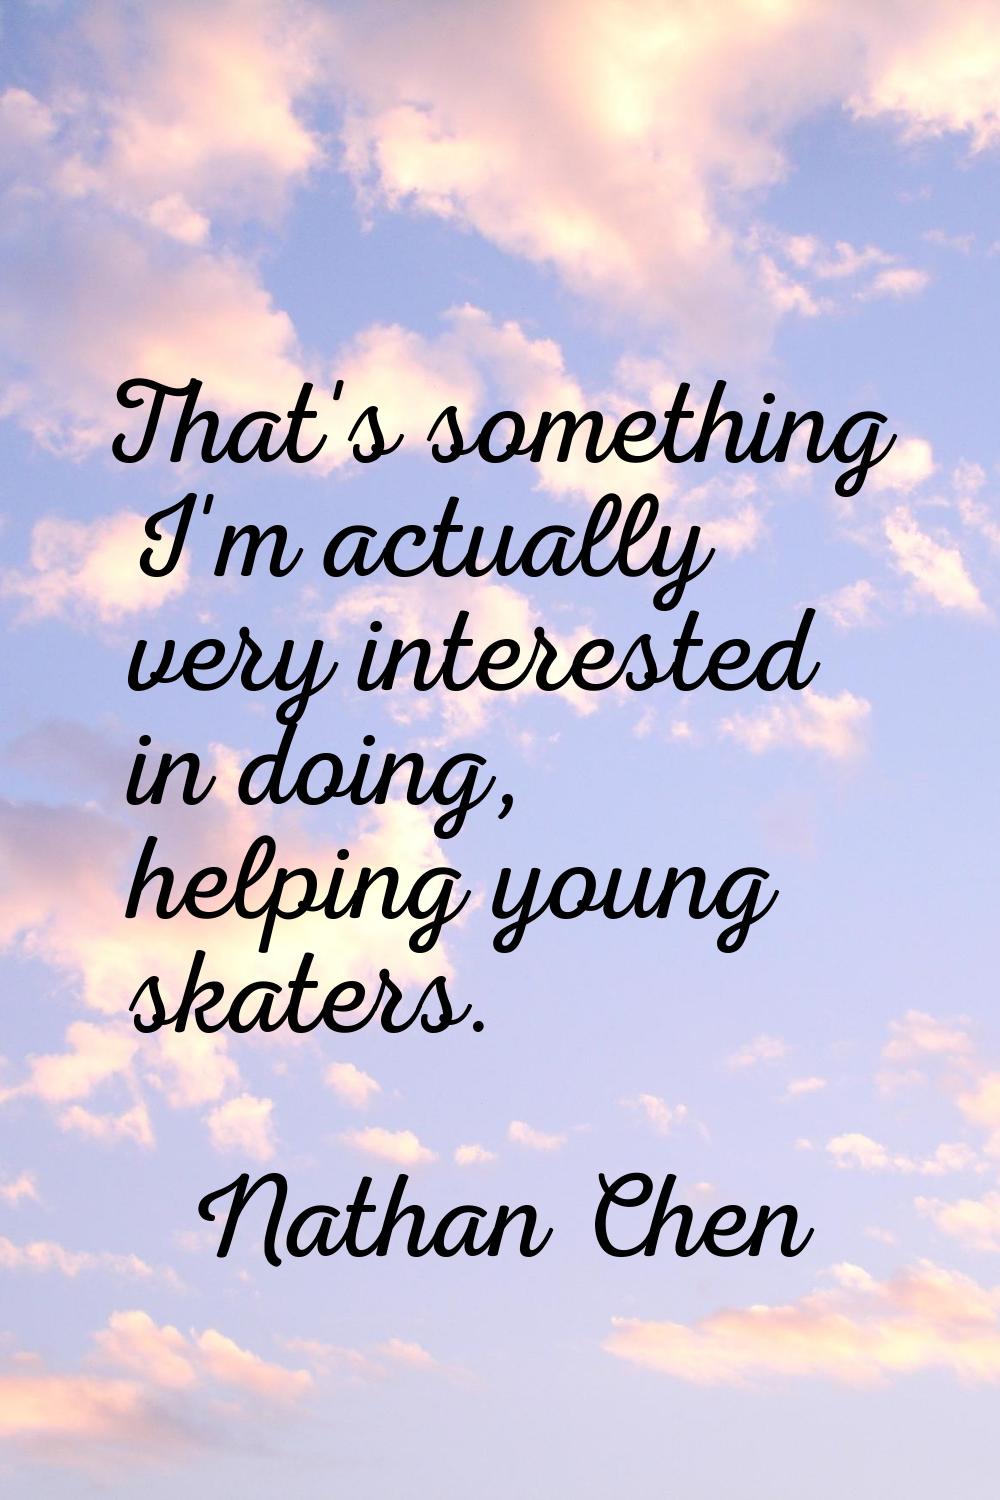 That's something I'm actually very interested in doing, helping young skaters.